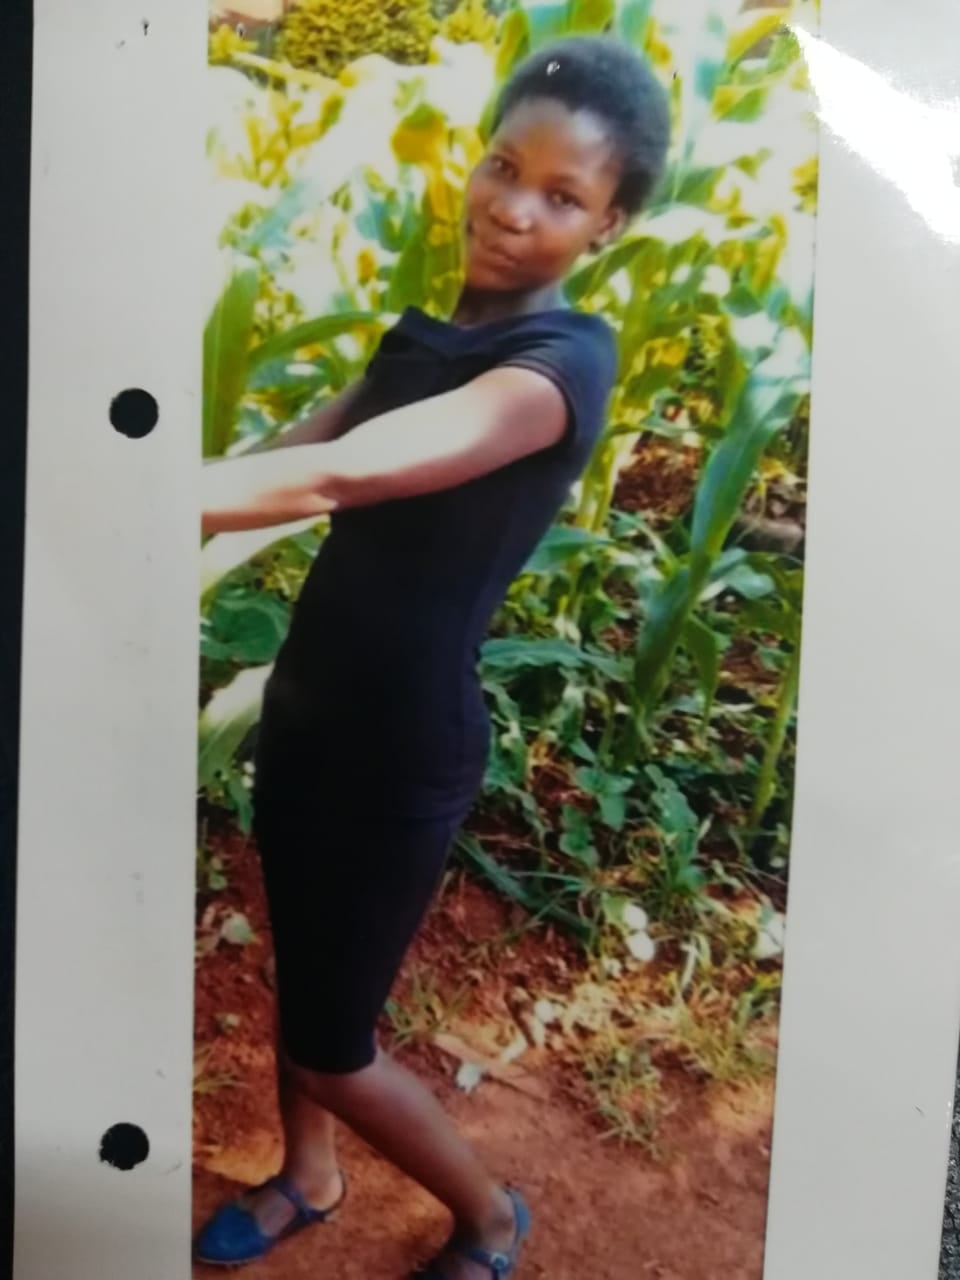 Police continue search for missing woman in Polokwane